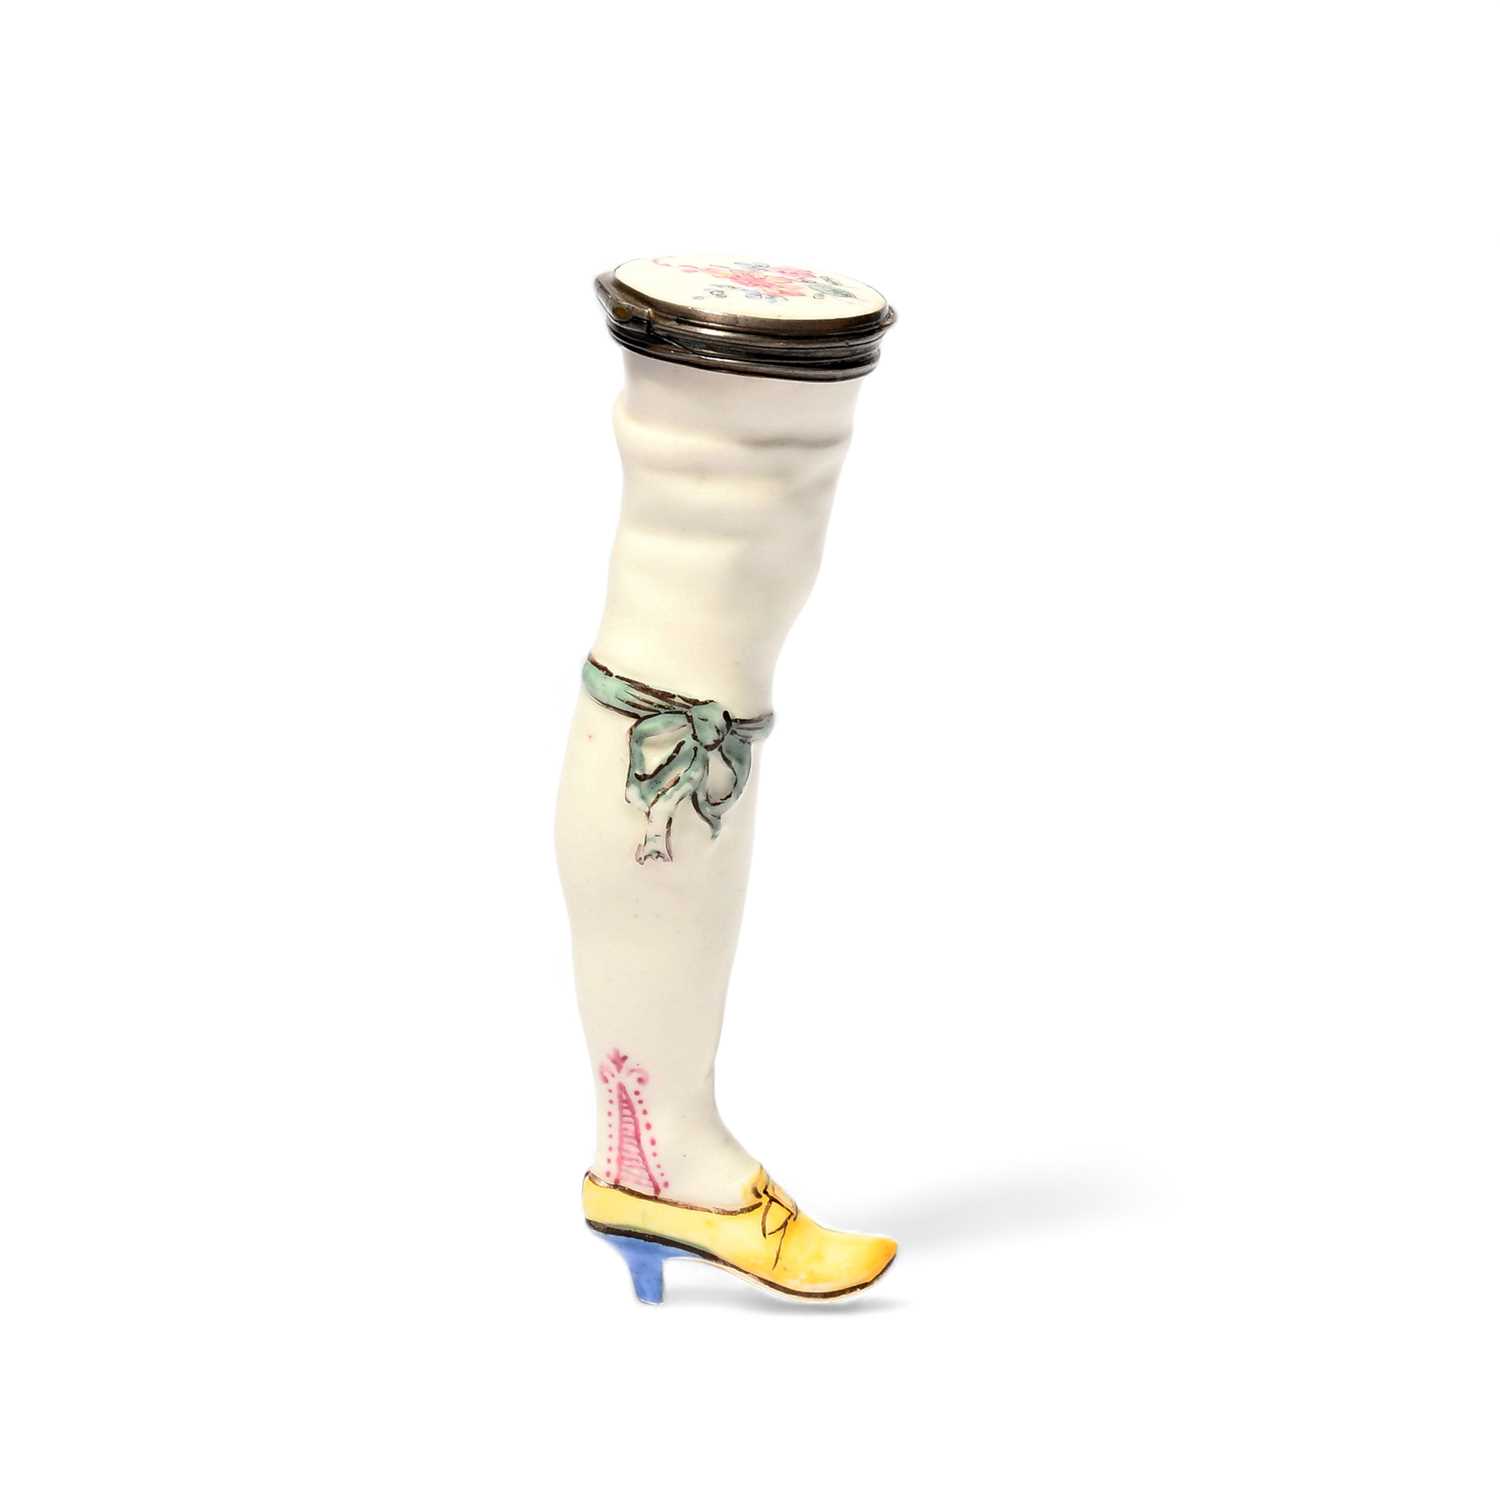 A silver-mounted Mennecy etui or bodkin case, c.1750, modelled as the leg of lady, in a white